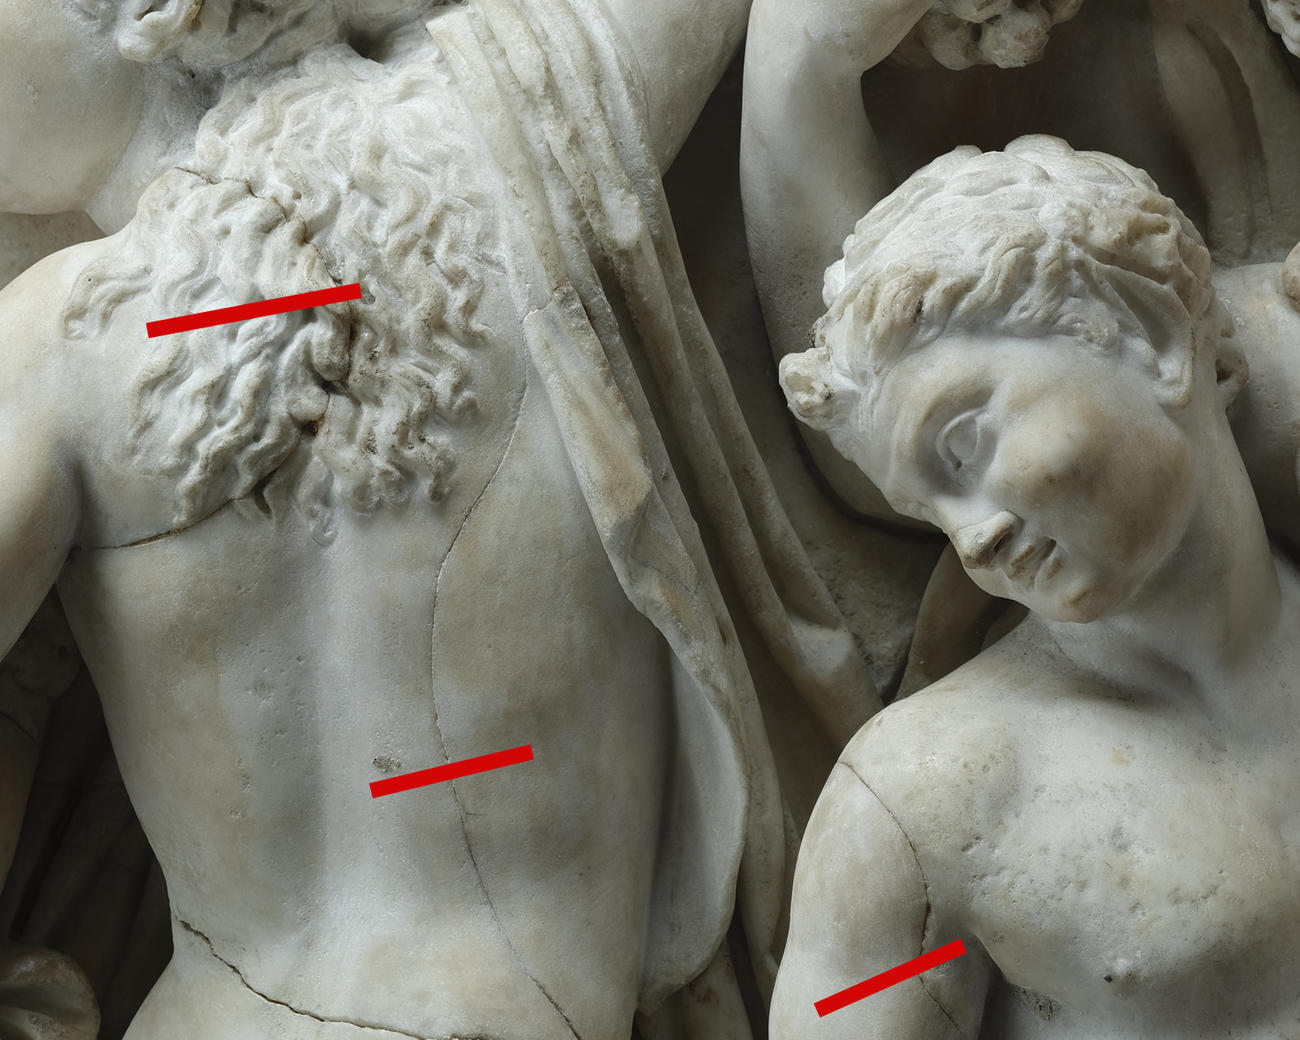 A close up of the sarcophagus showing where the pins would be